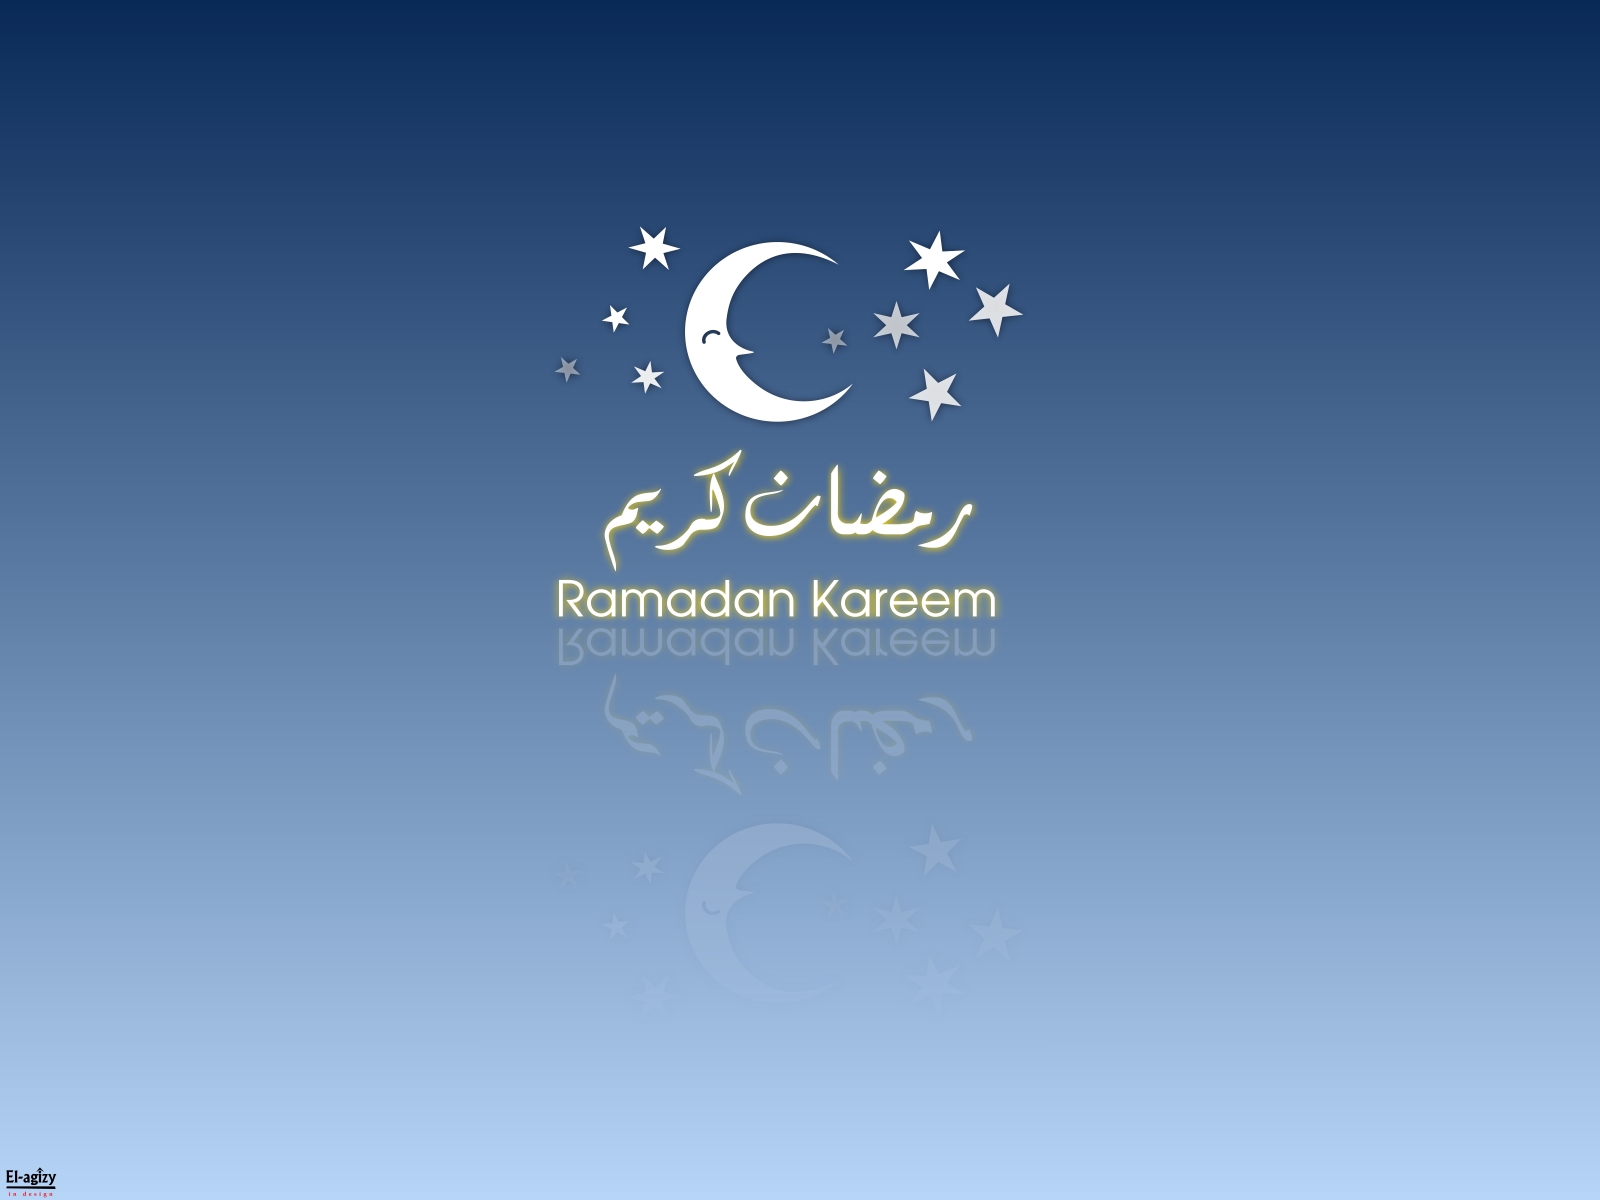 Ramadan Kareem to all my Muslim Family, friends and fans 